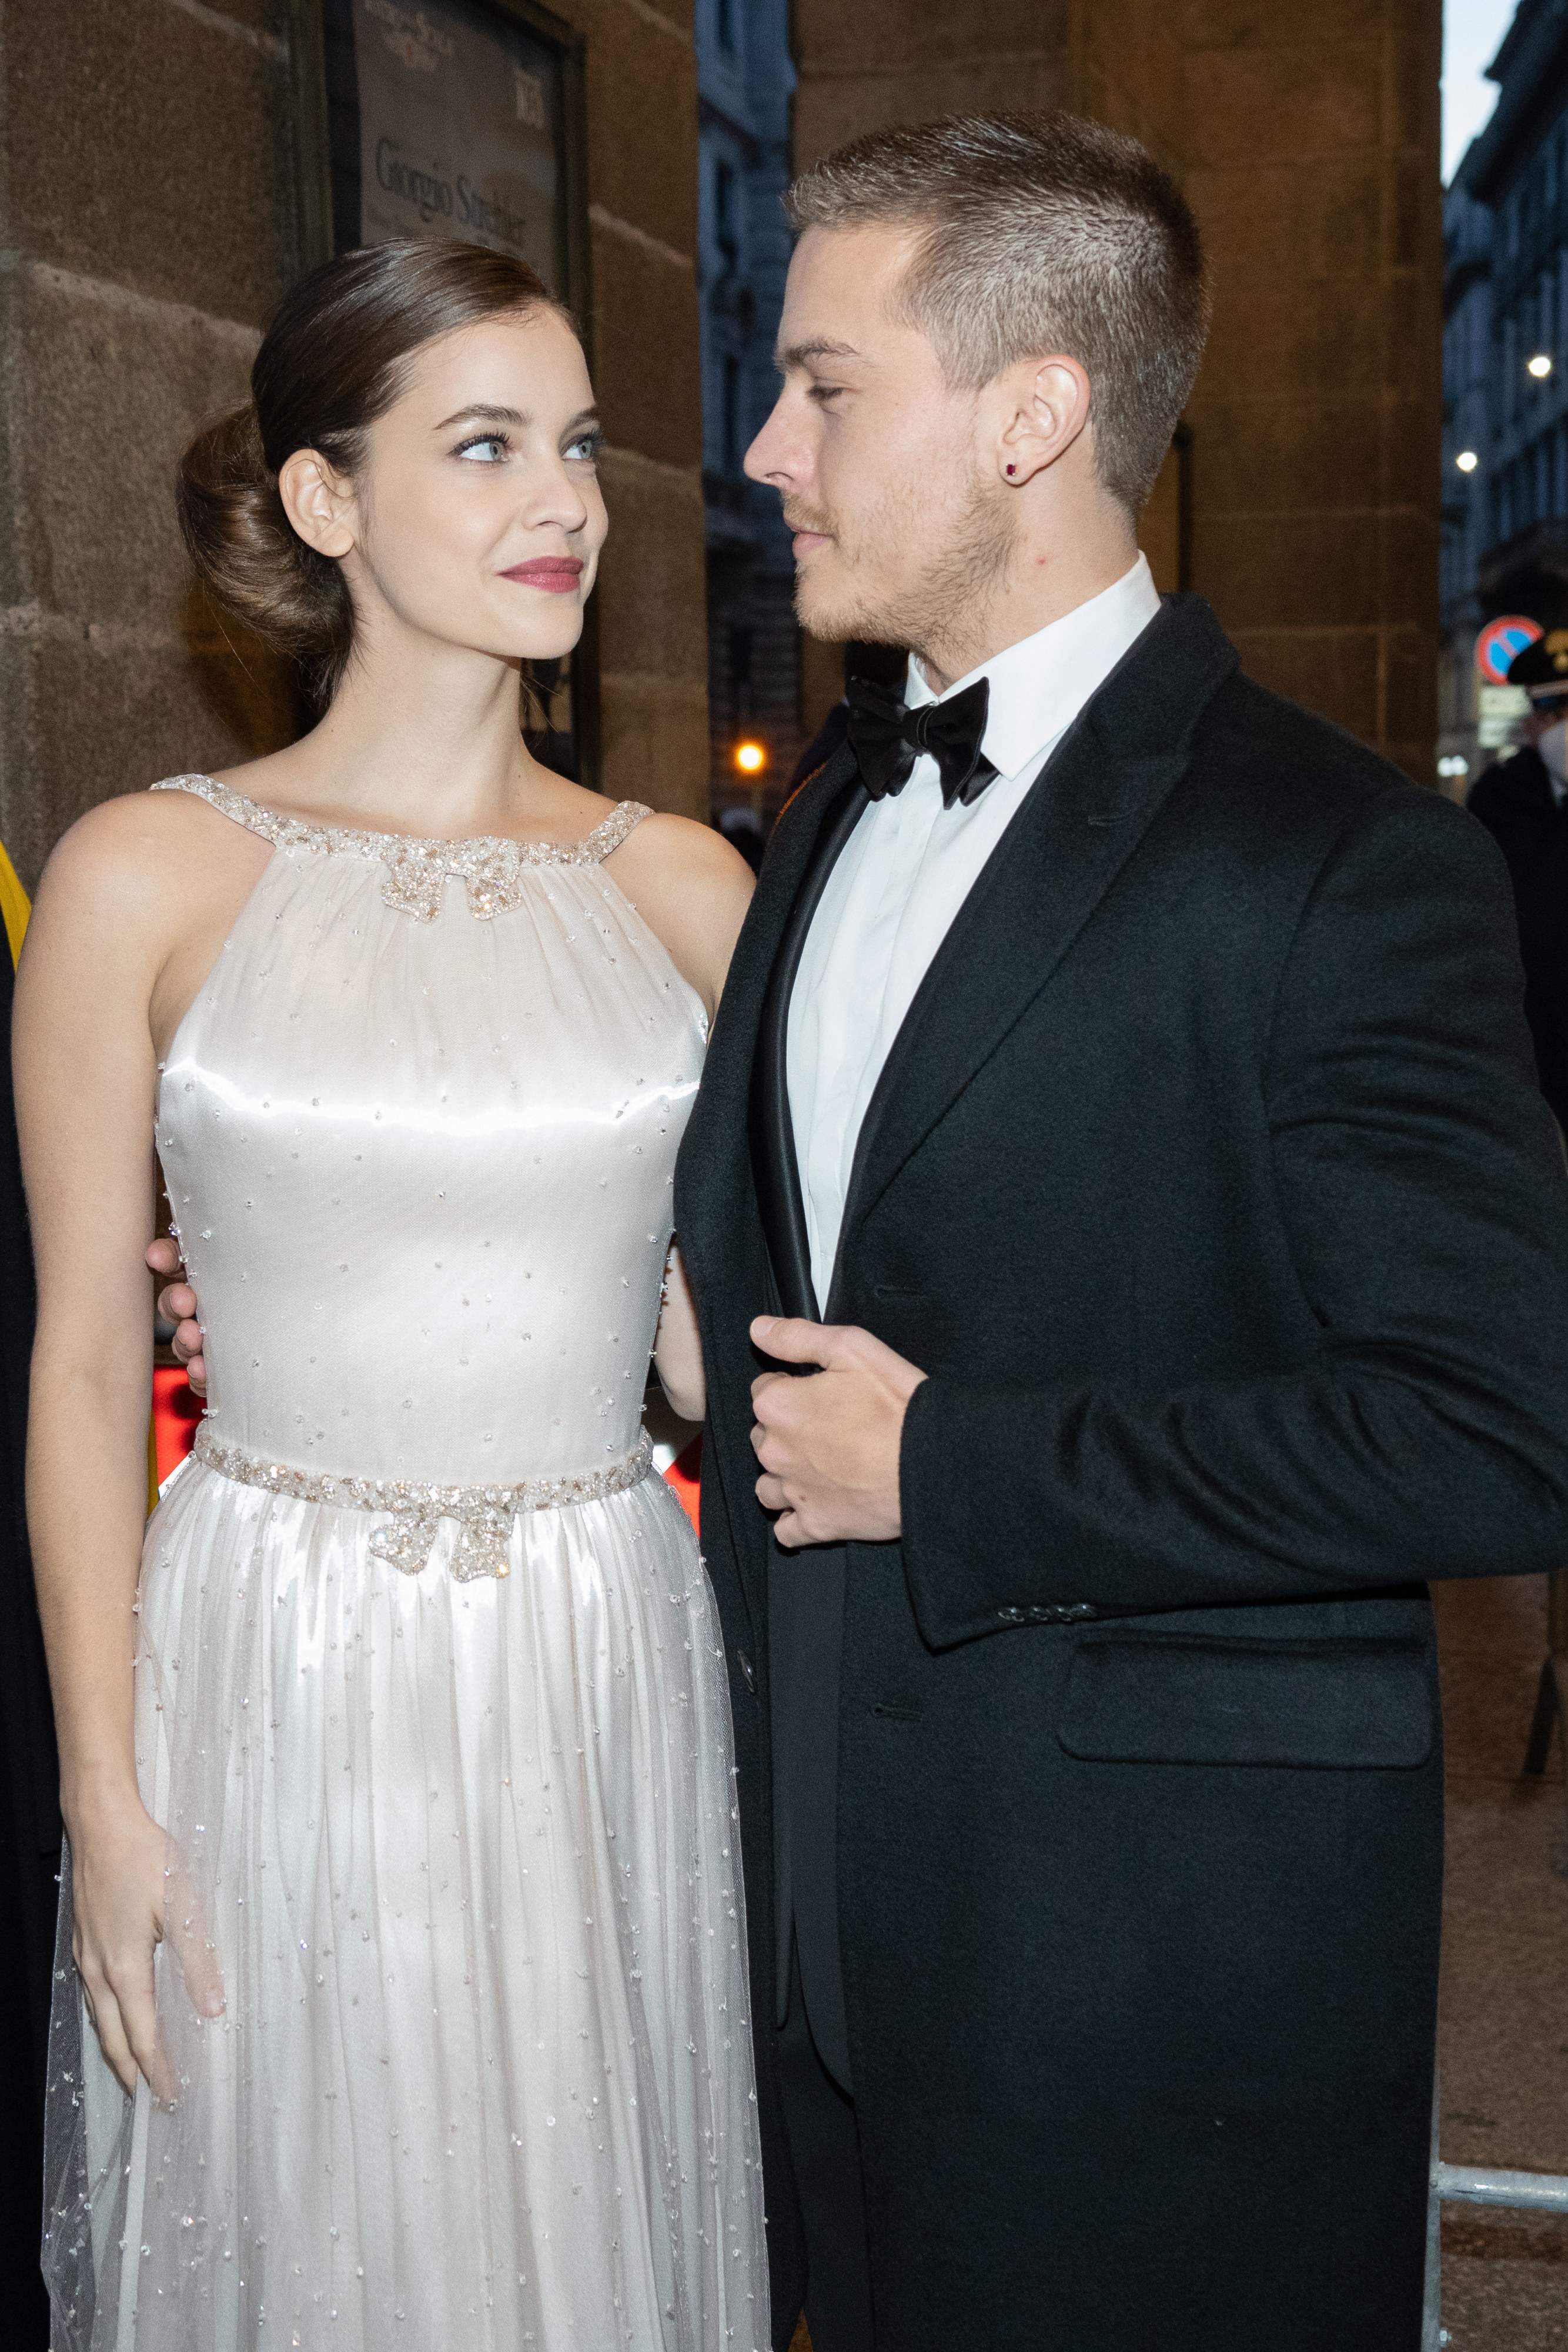 Barbara Palvin and Dylan Sprouse attend the opening of the Teatro alla Scala opera season on Dec. 7, 2021